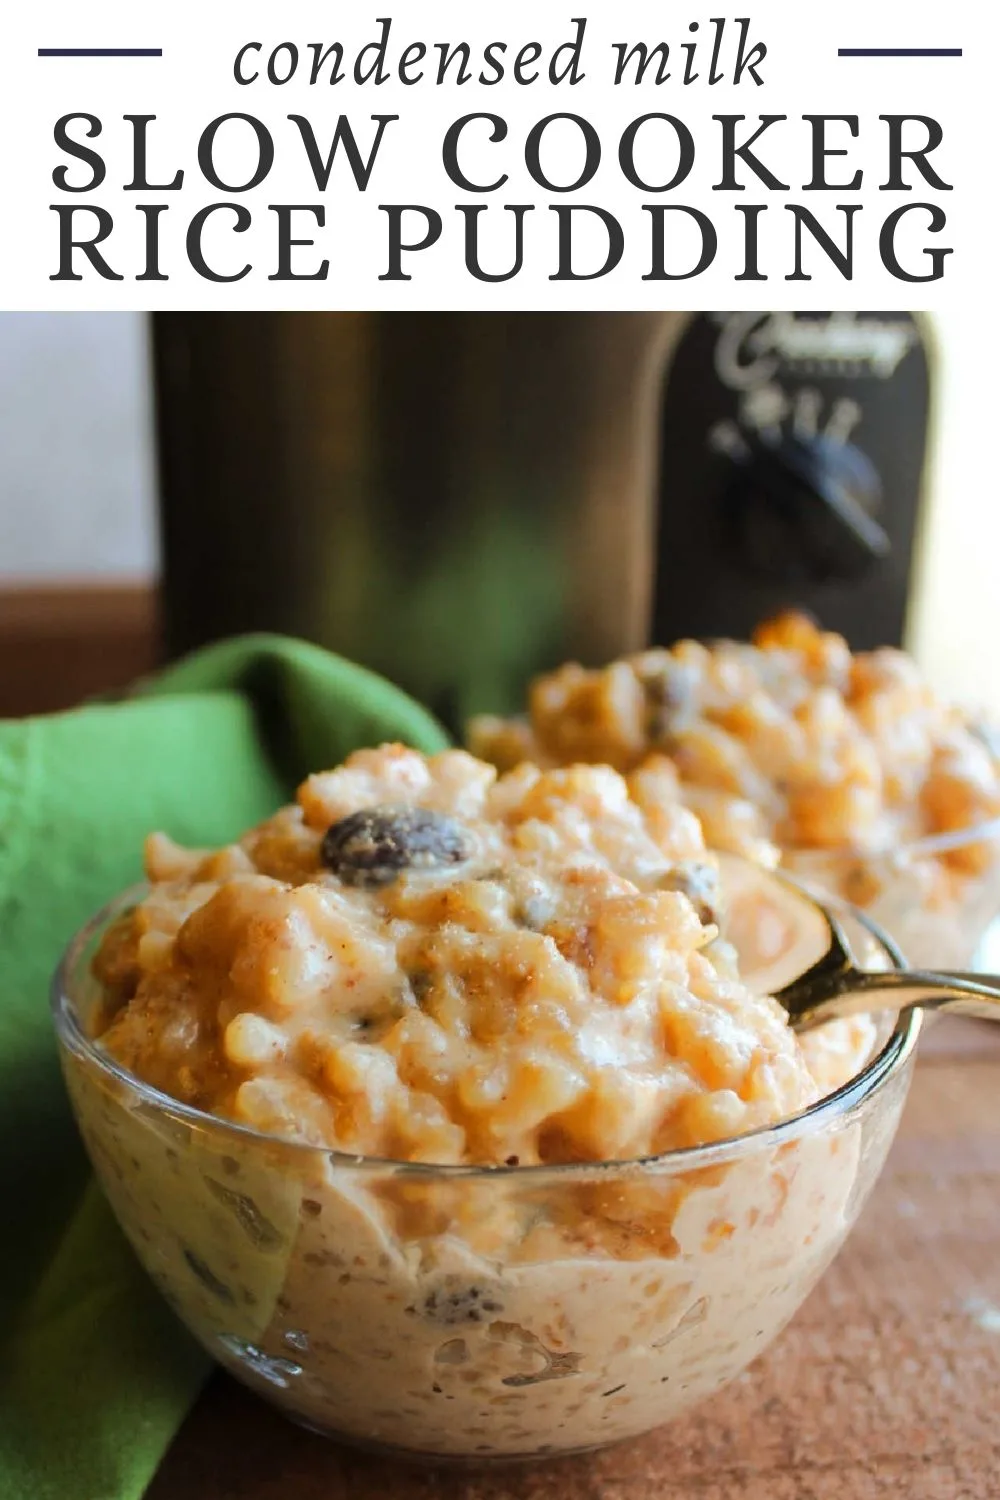 This creamy slow cooker rice pudding has the goodness of sweetened condensed milk and cinnamon cooked inside. It is slightly caramelized, really comforting and so easy to make.